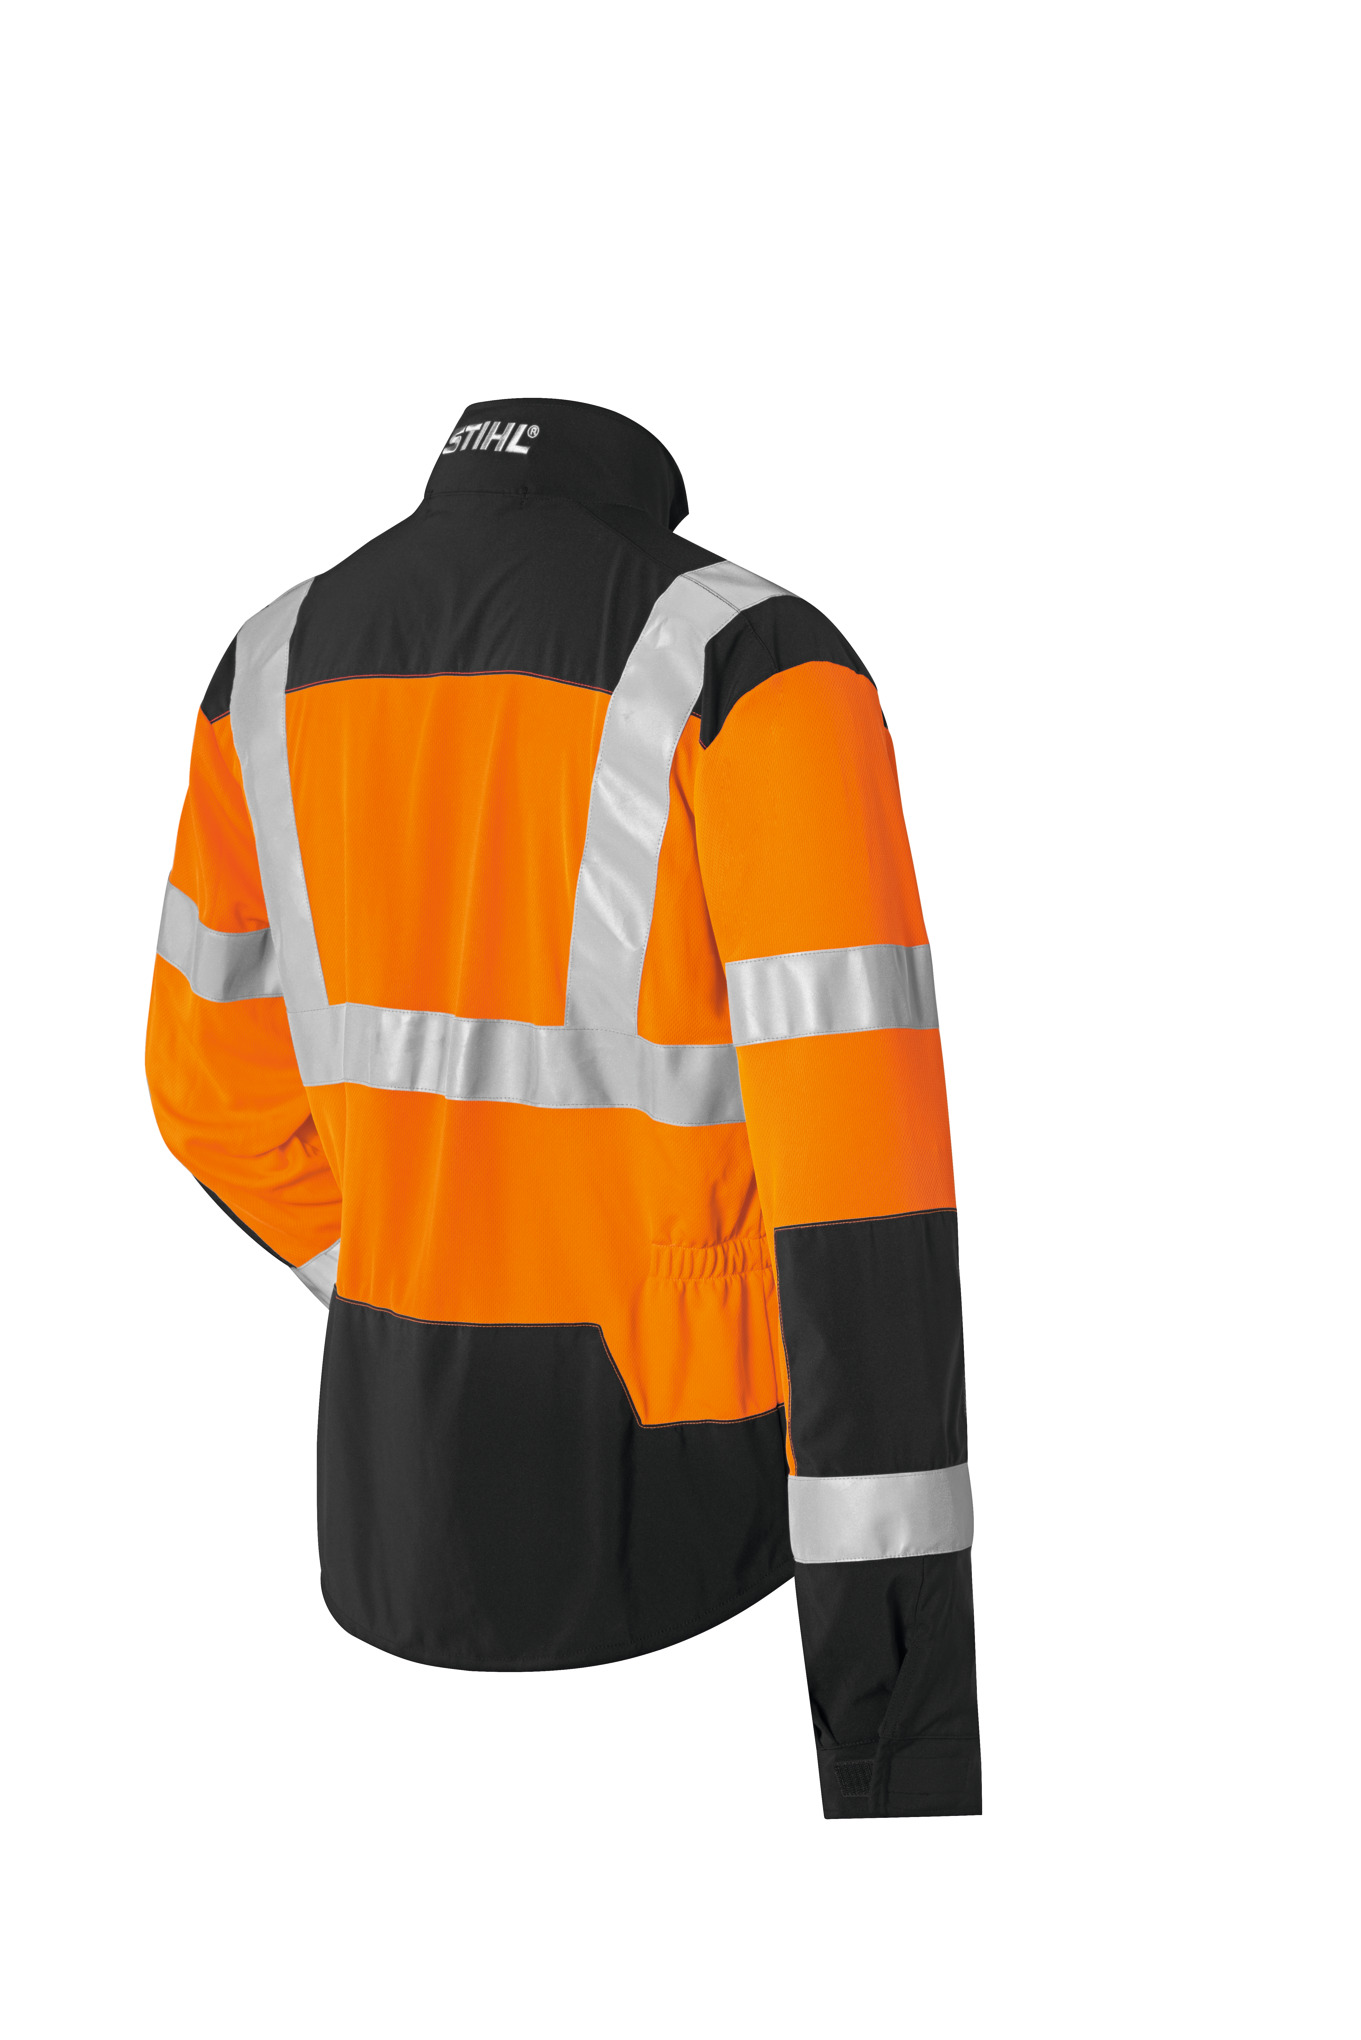 VENT high-visibility jacket